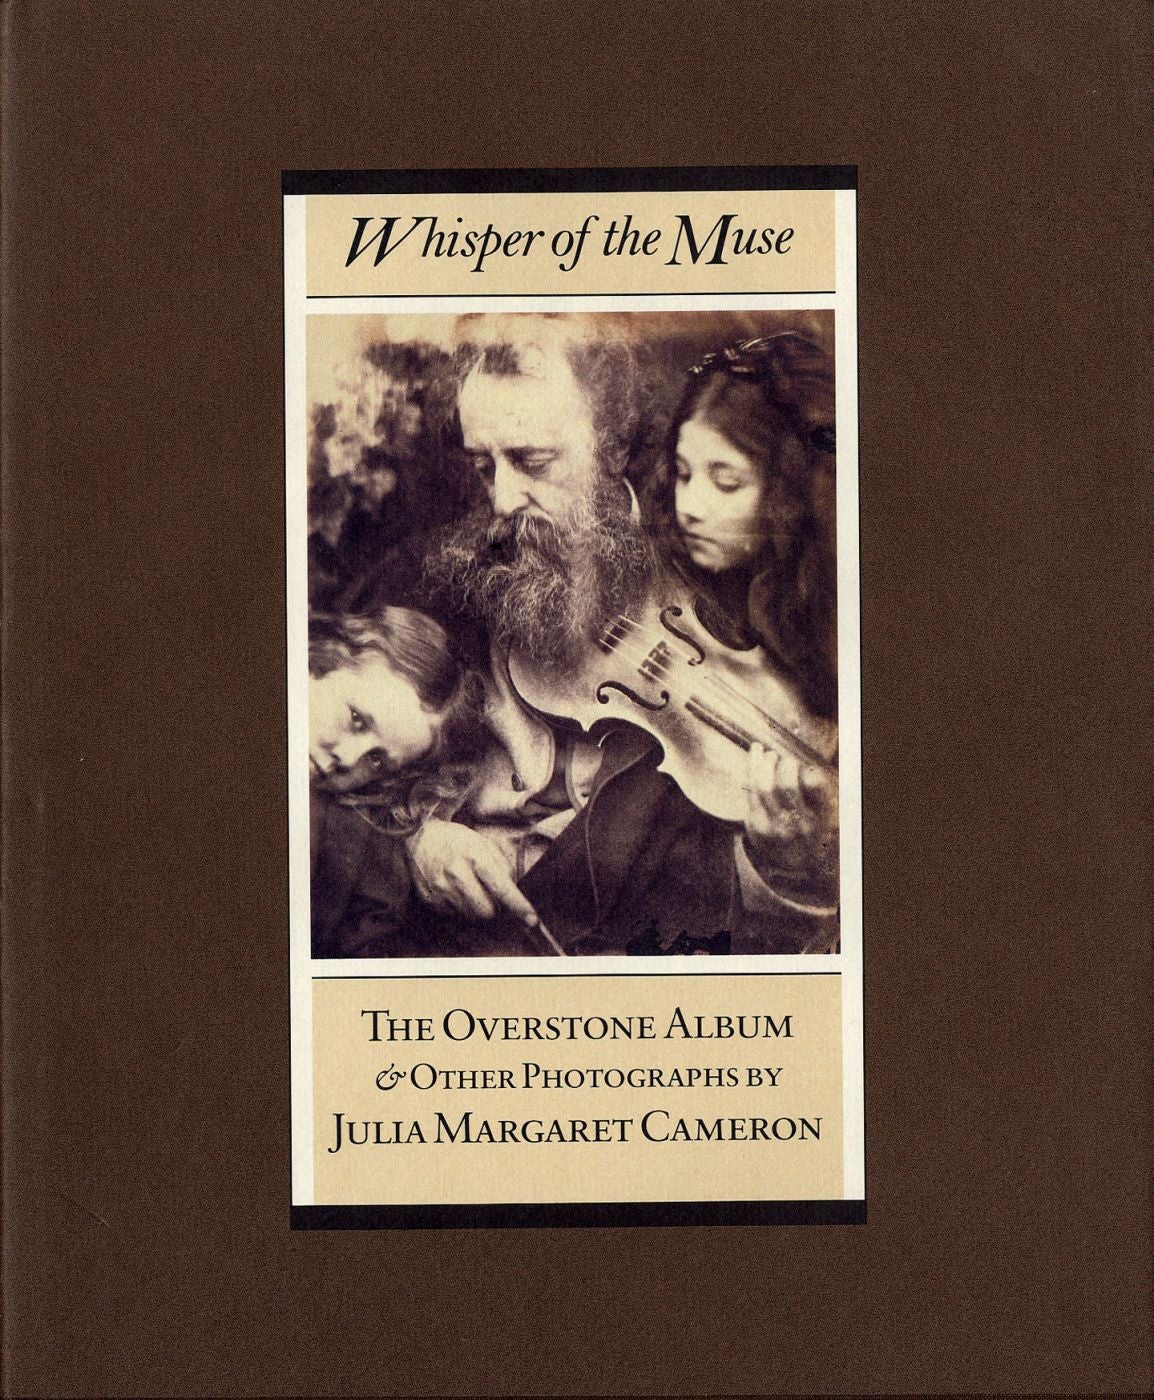 Whisper of the Muse: The Overstone Album & Other Photographs by Julia Margaret Cameron